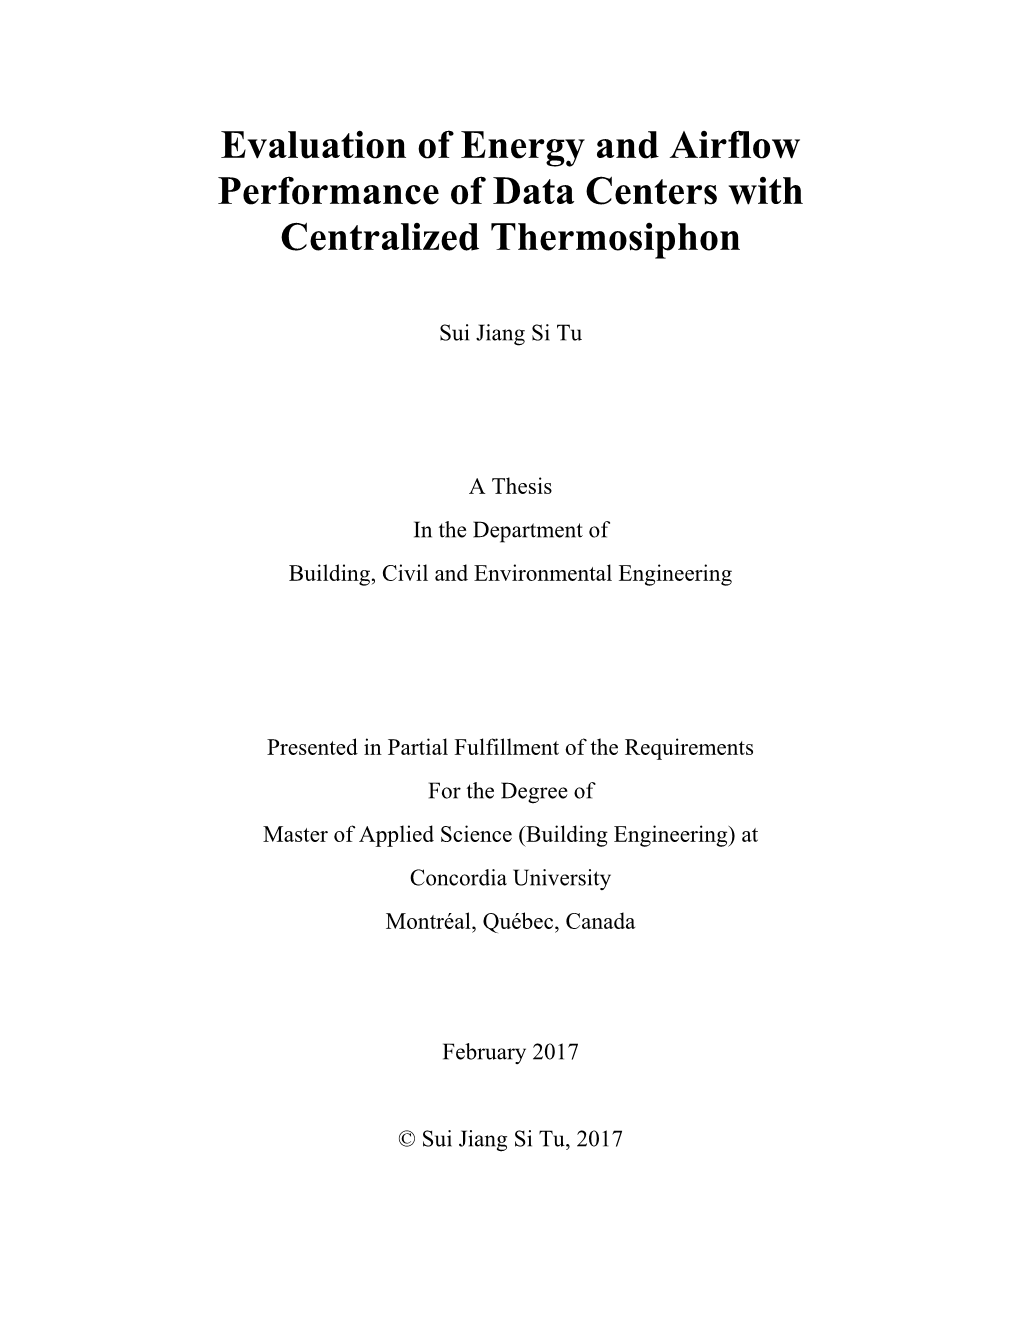 Evaluation of Energy and Airflow Performance of Data Centers with Centralized Thermosiphon